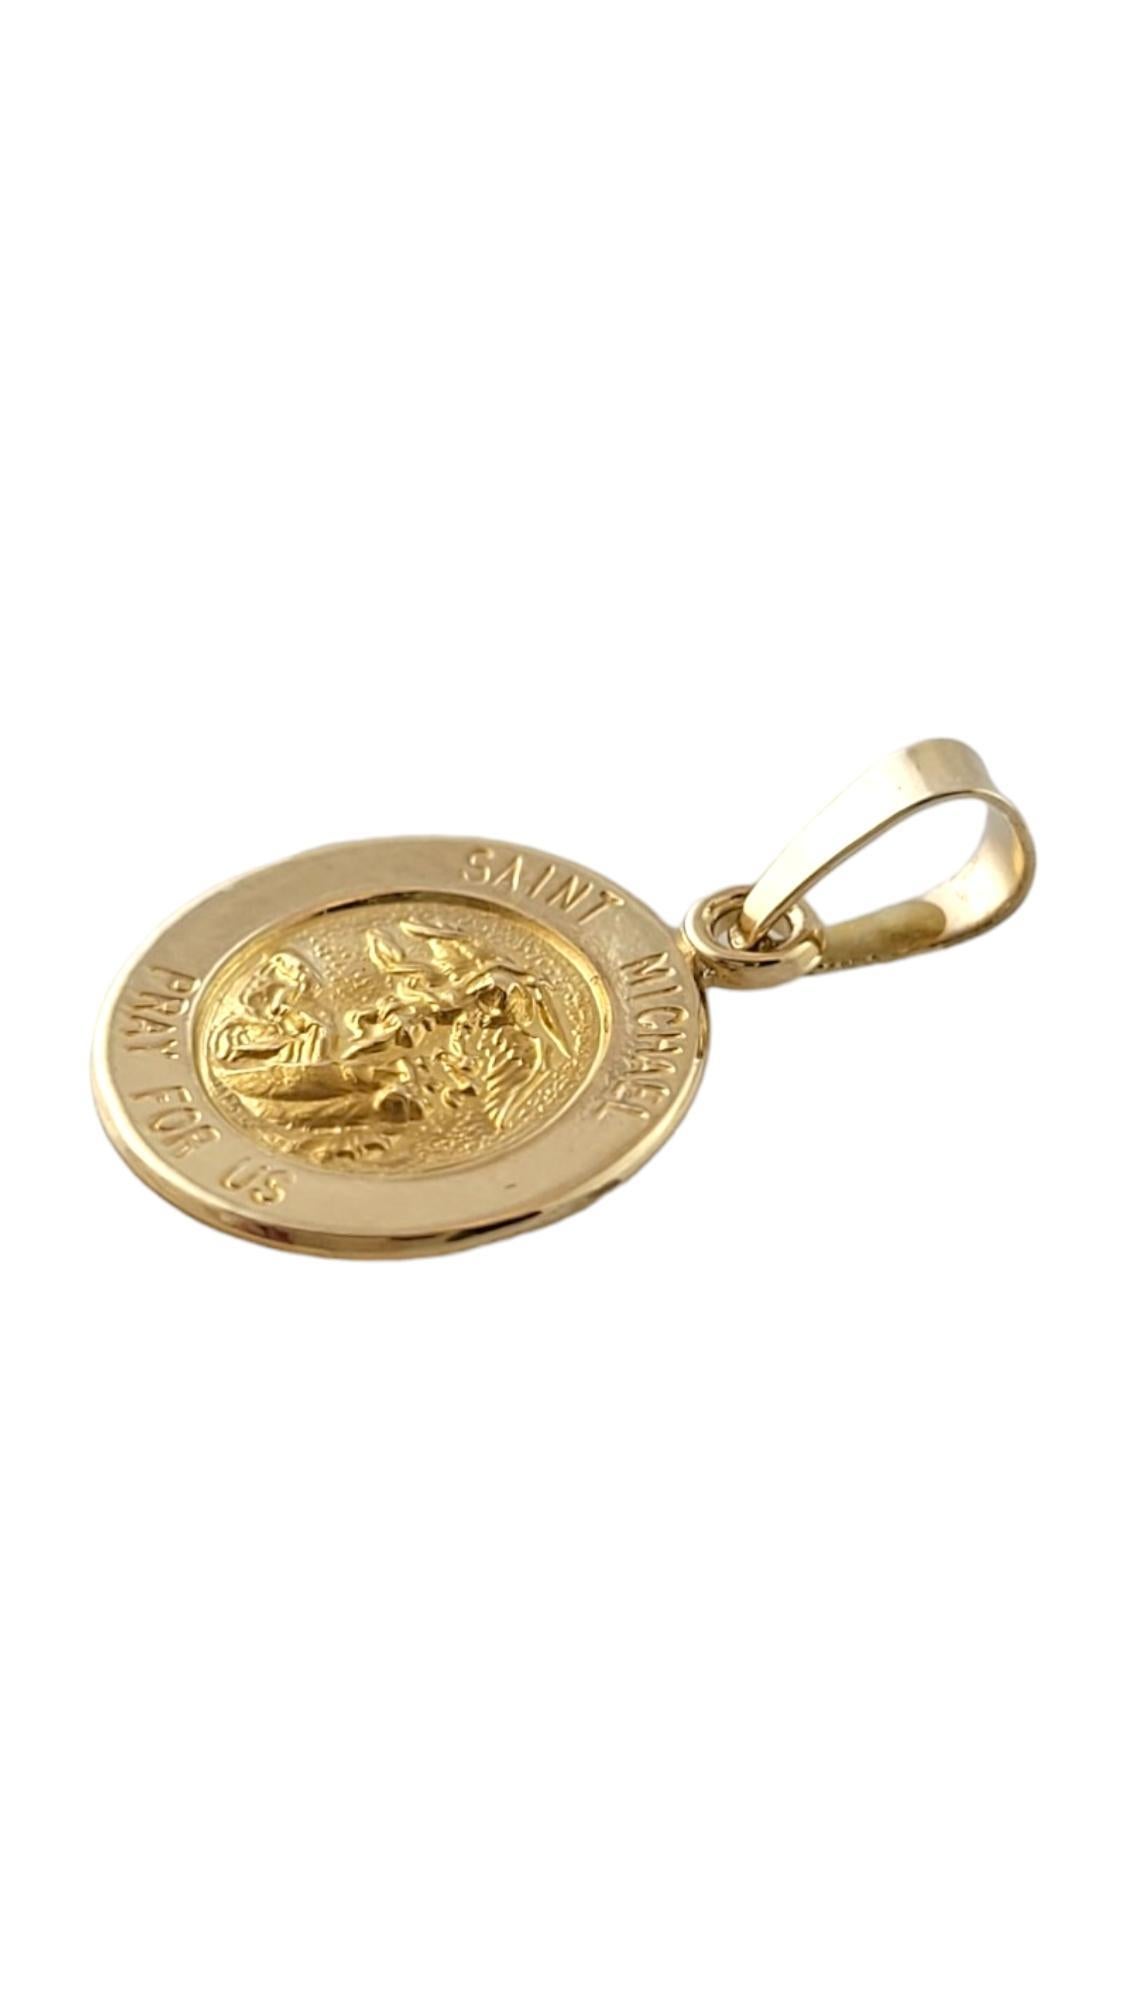 14K Yellow Gold Saint Michael Pray for Us Charm

This beautiful Saint Michael Pray for Us charm was crafted with meticulous detail from 14K yellow gold to make the perfect charm!

Size: 14.58mm X 11.84mm X 0.84mm
Length w/ bail: 19.08mm

Weight: